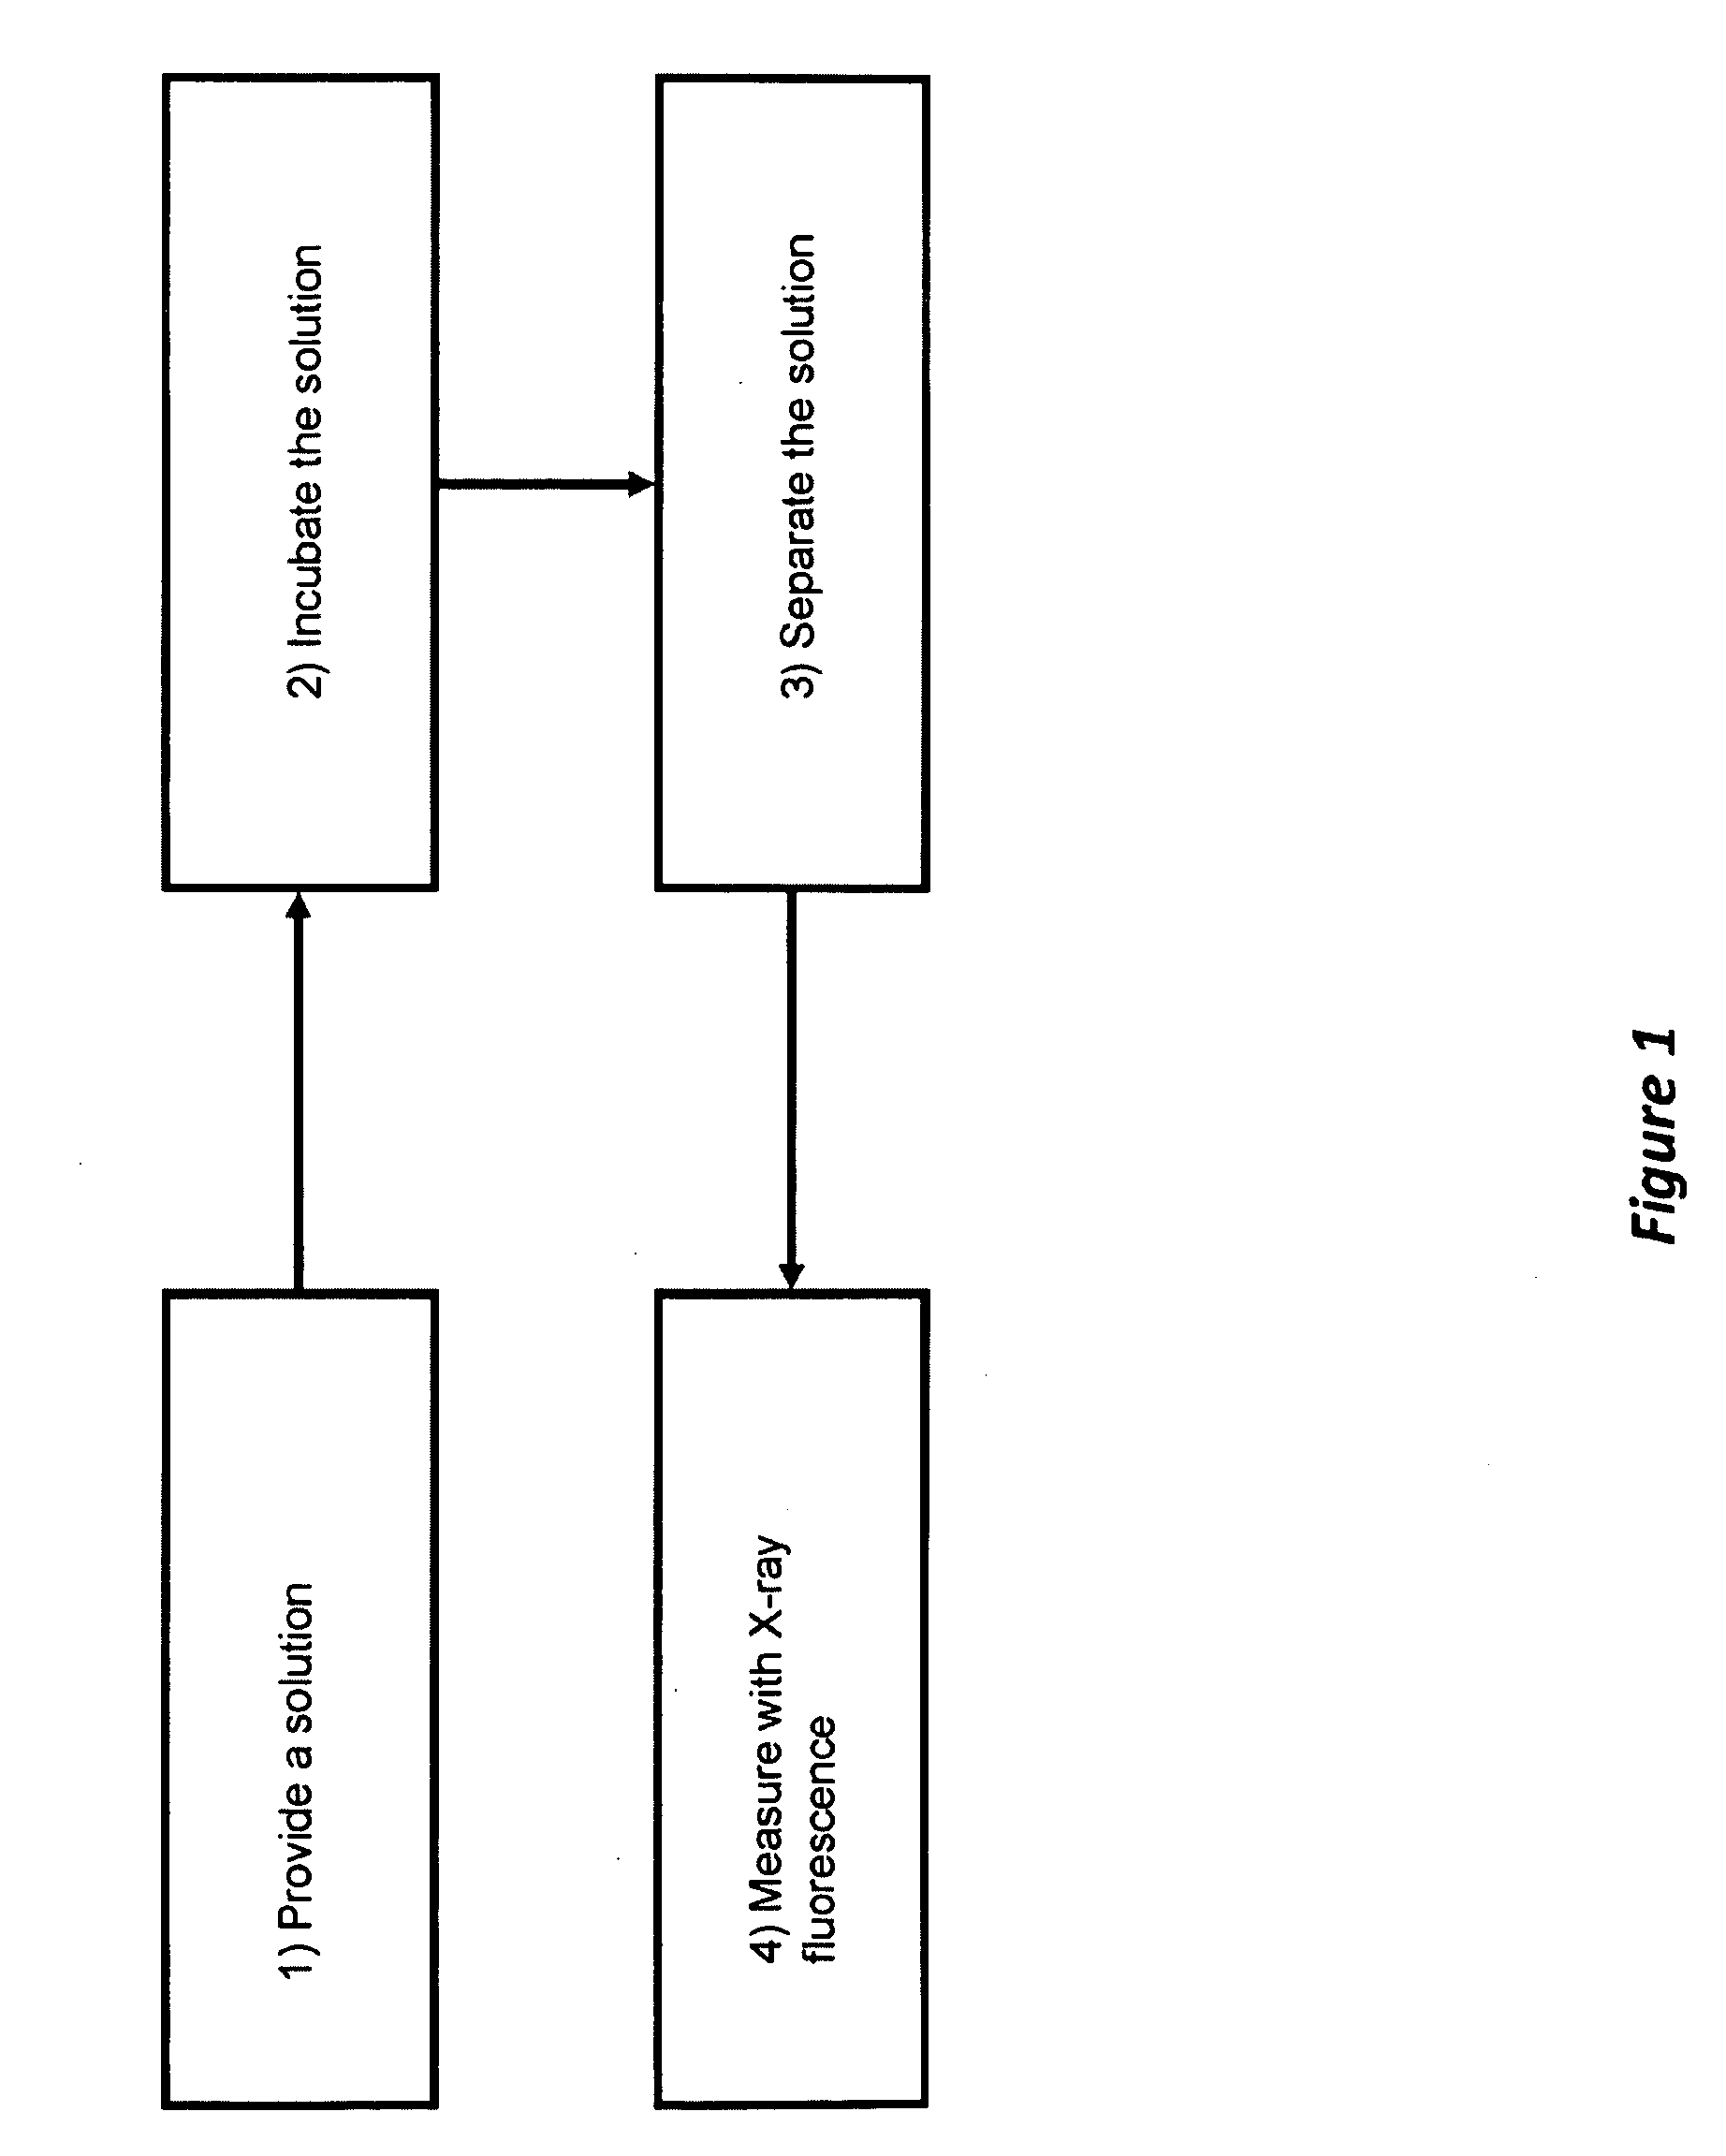 Method and Apparatus for Measuring Protein Post-Translational Modification